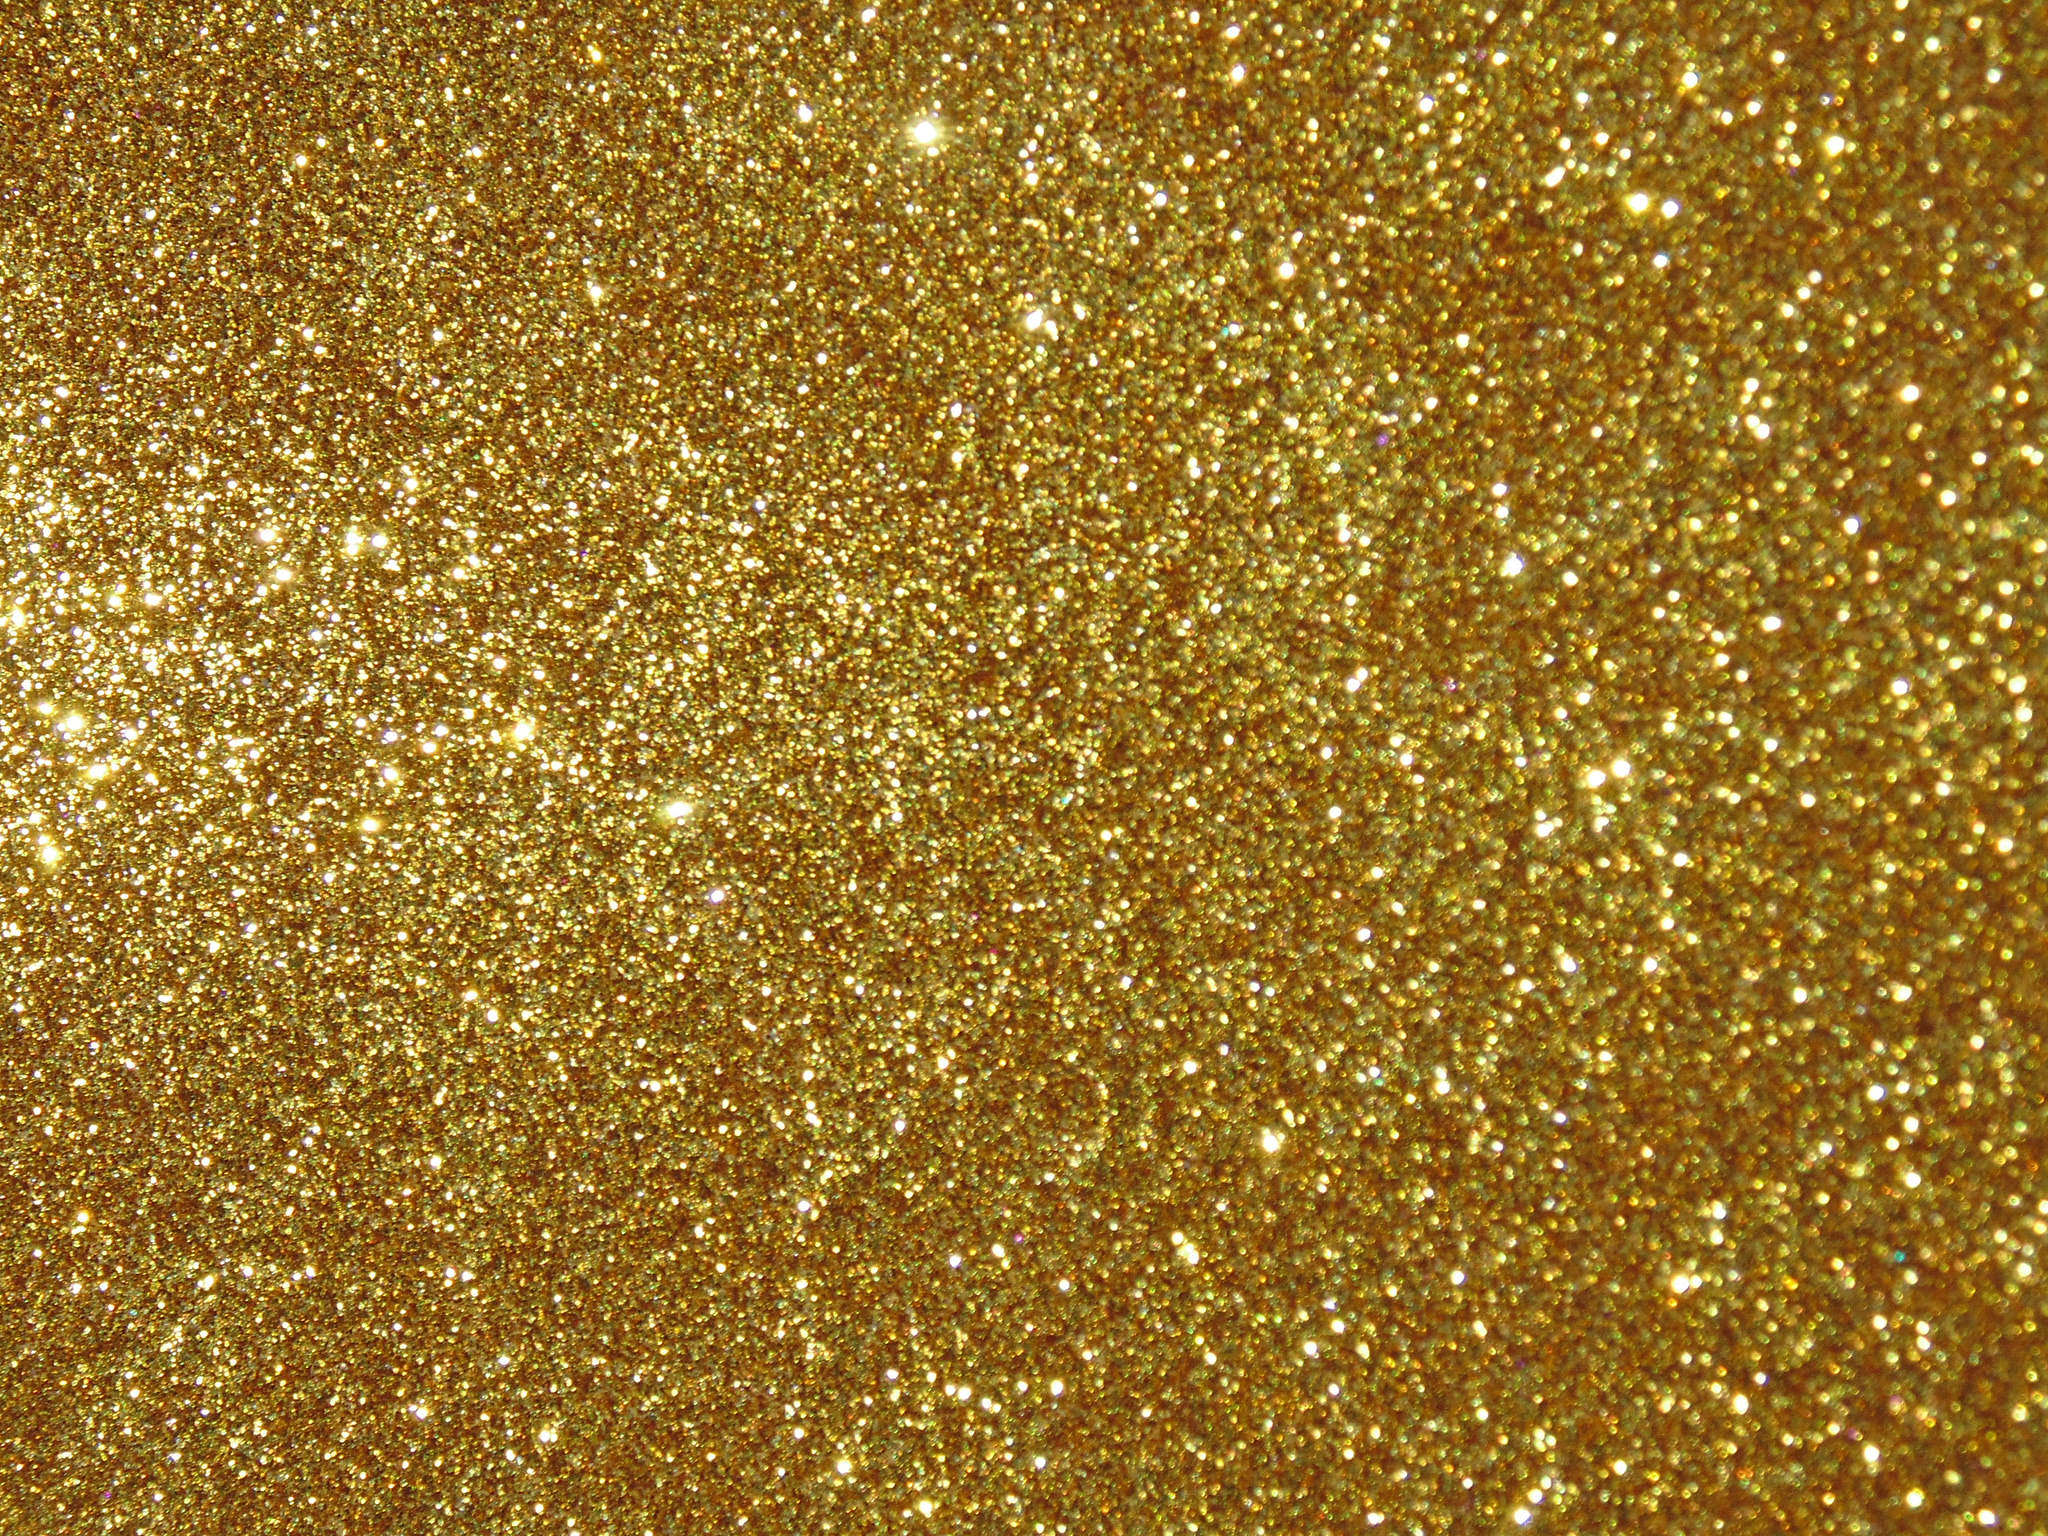 Gold Glitter Wallpaper Pictures To Pin